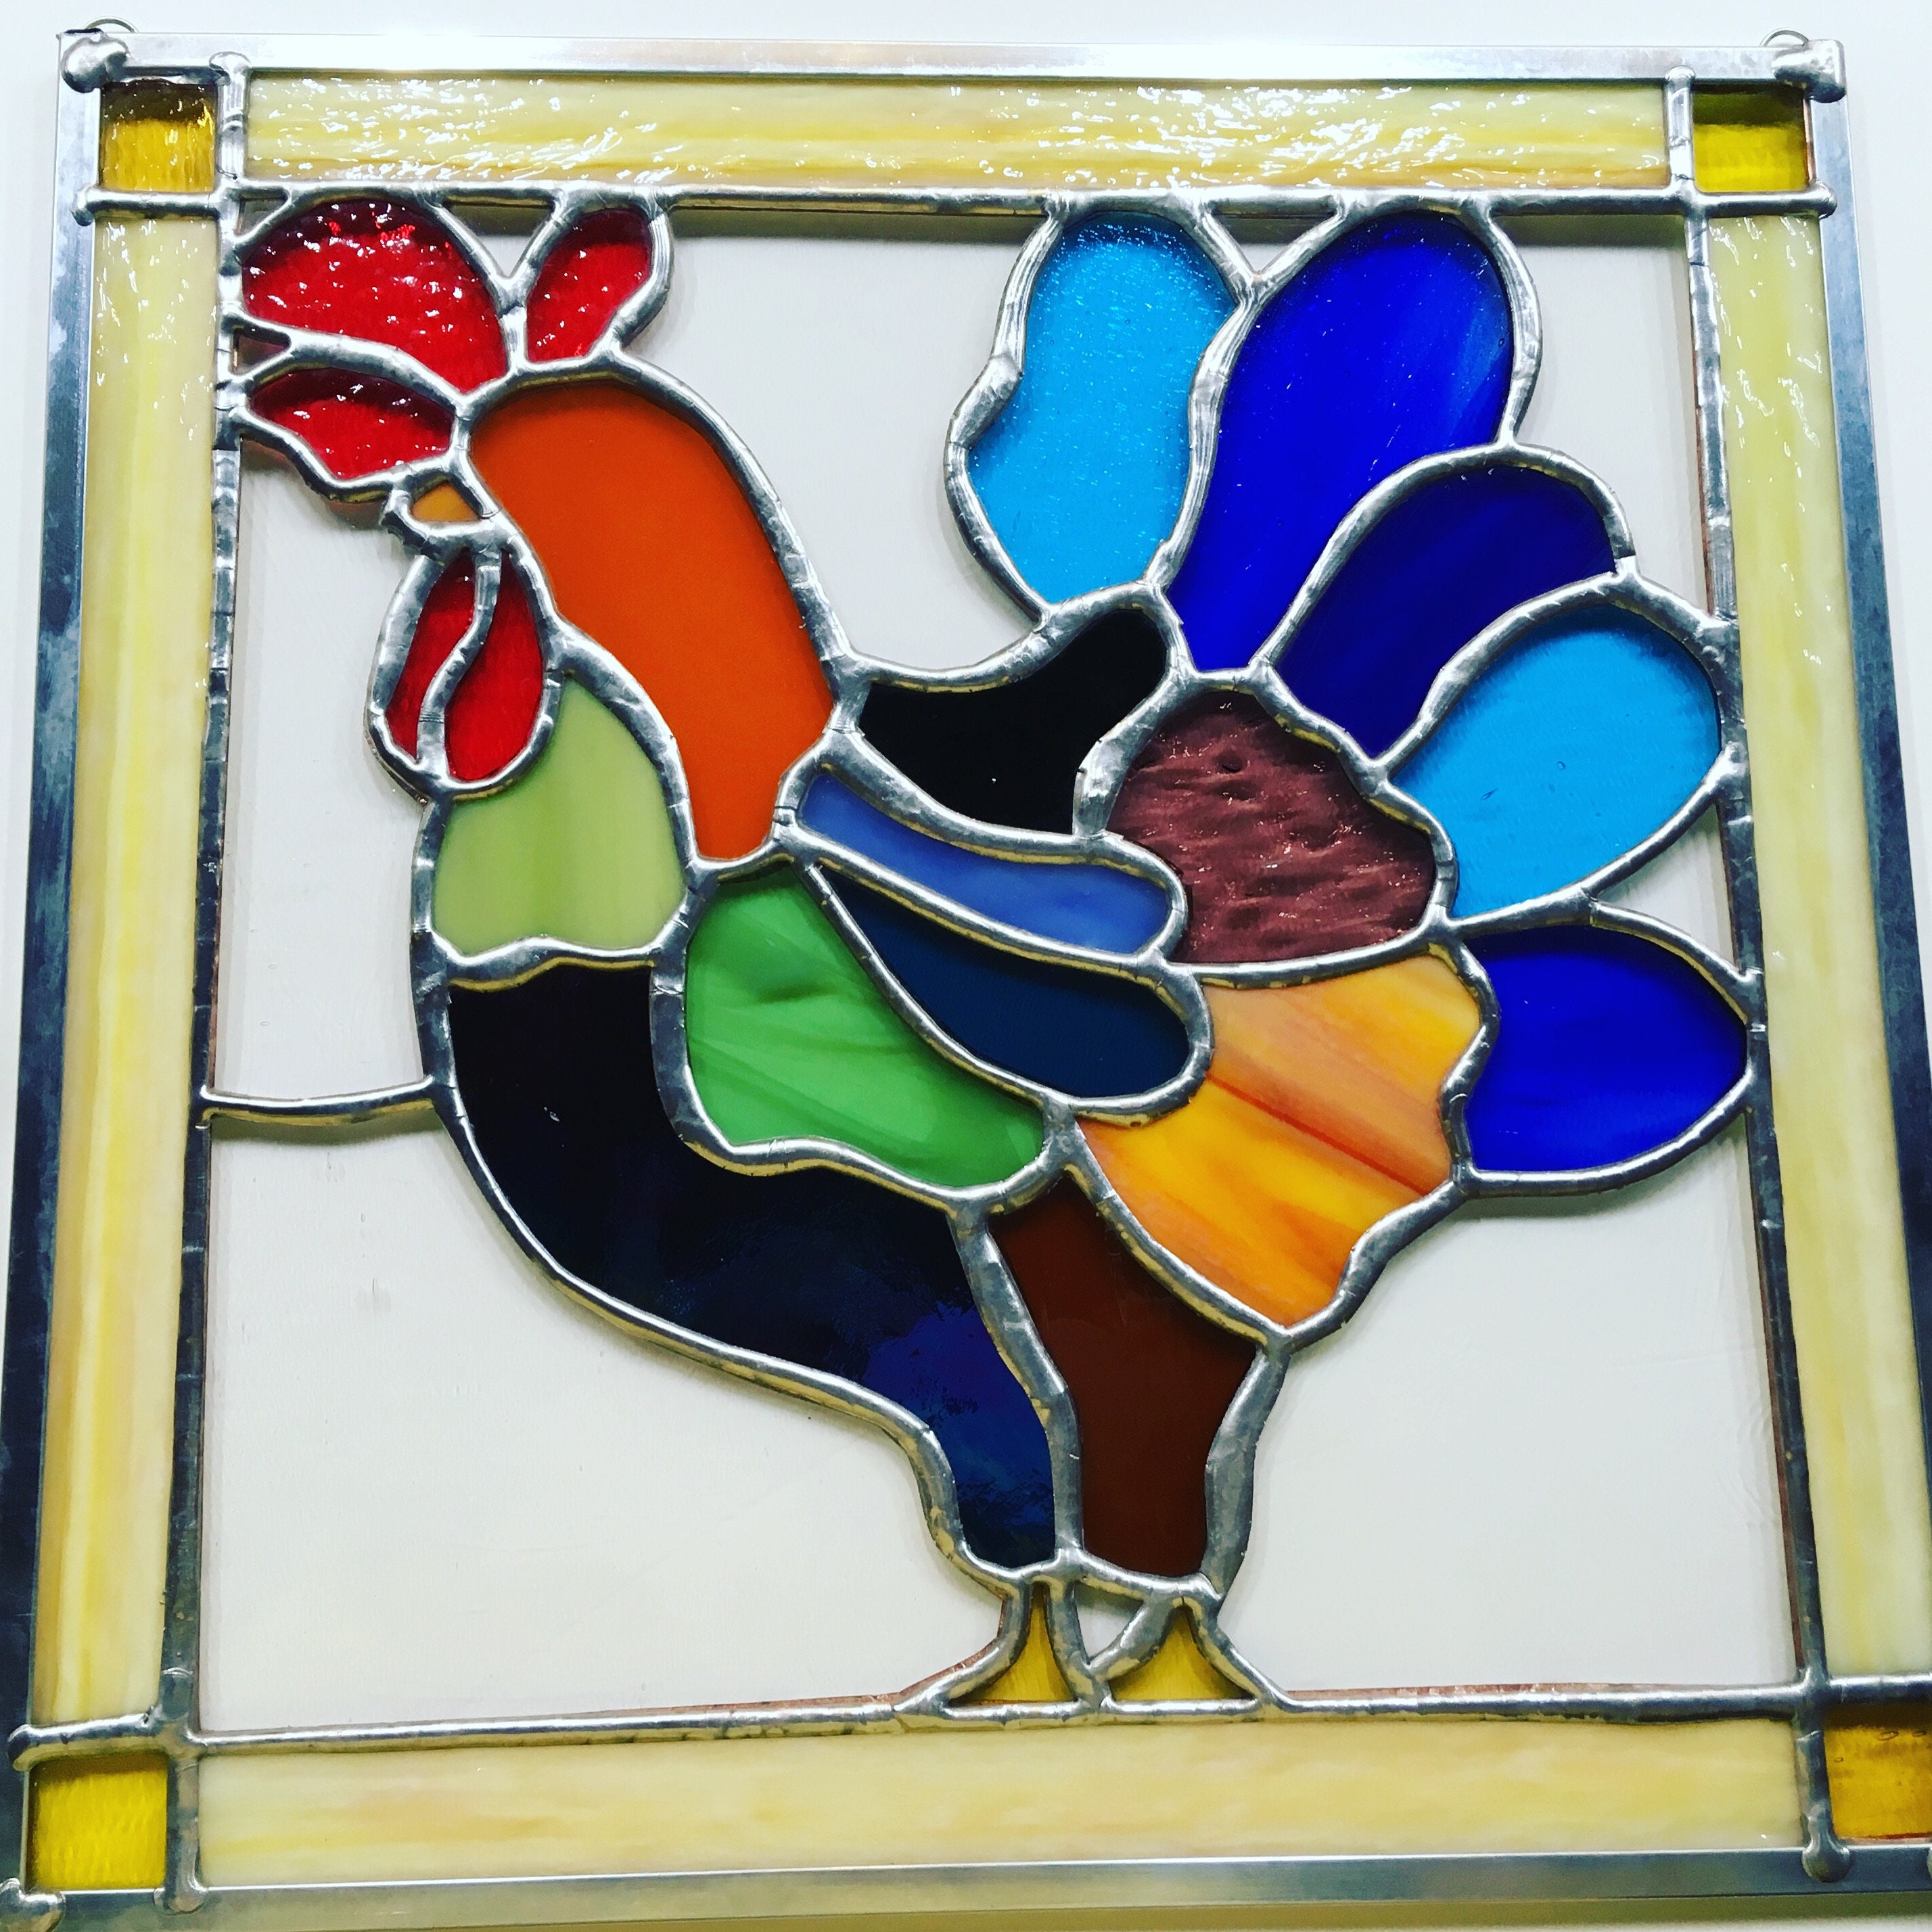 Chicken Stained Glass Pattern - Digital Download Only - Stained Glass –  Blue Hill Glass